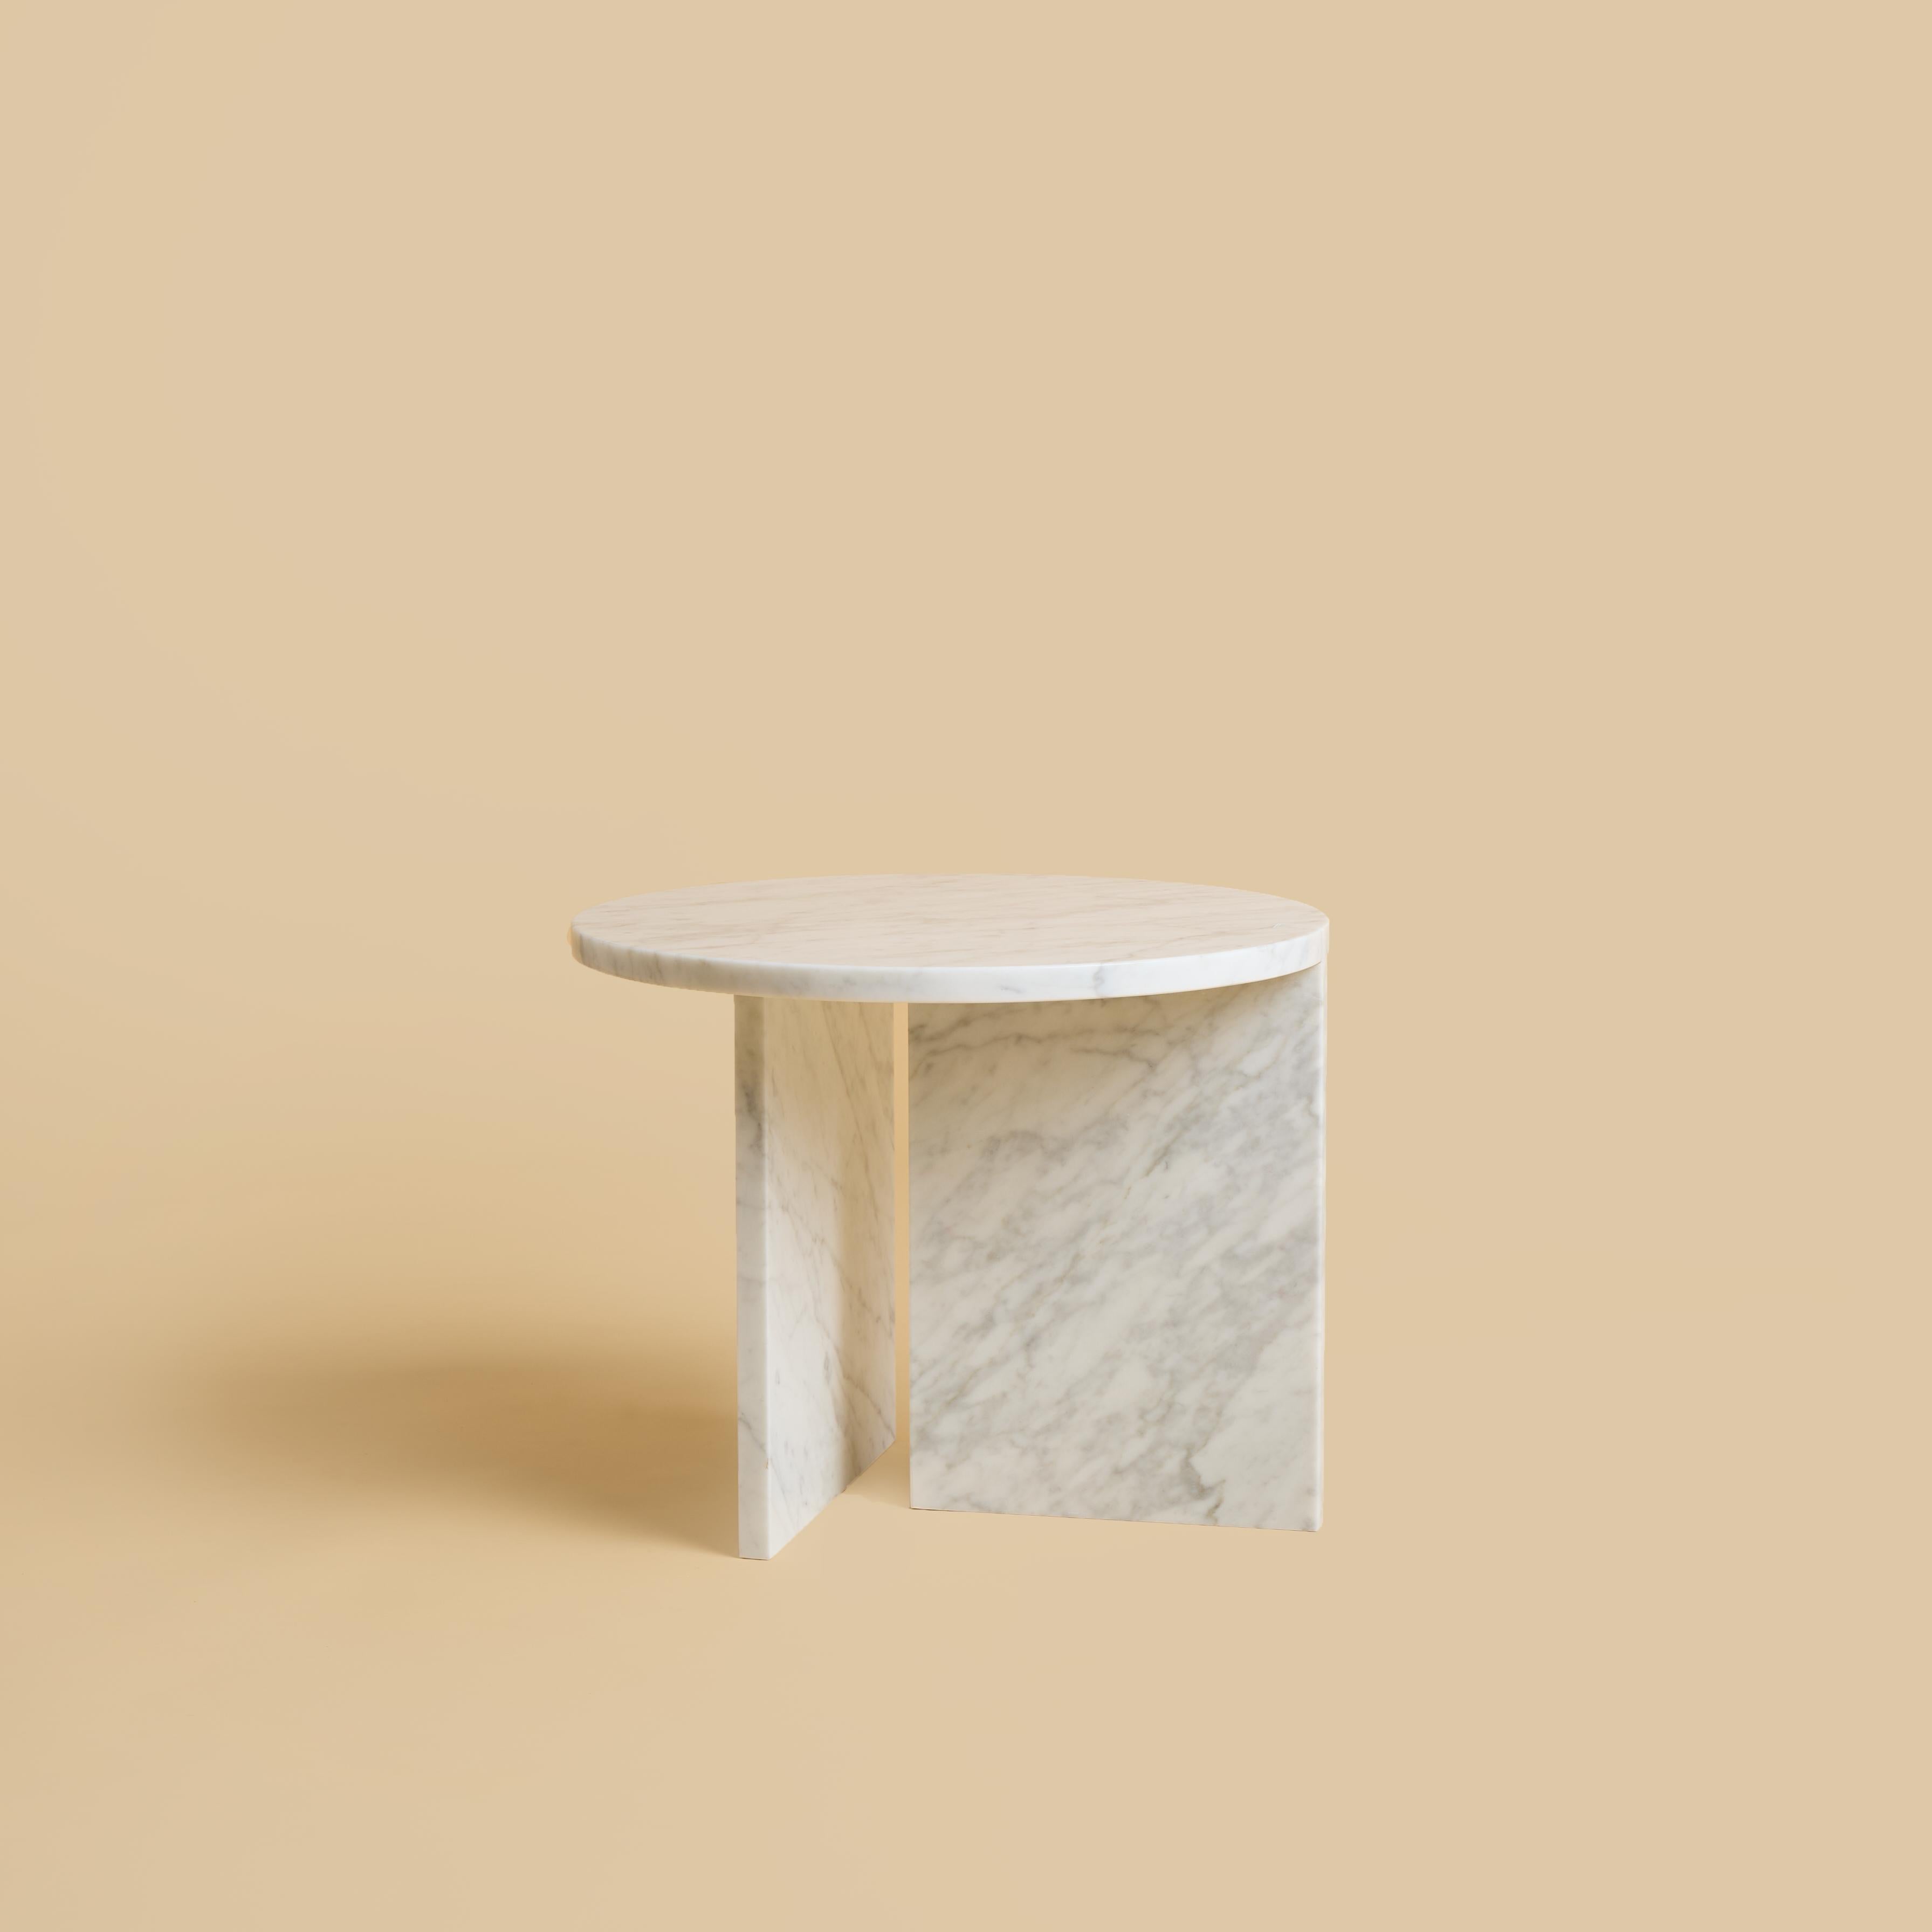 Carrara Marble Circular Side Table, Made in Italy In New Condition For Sale In Lentate Sul Seveso, IT